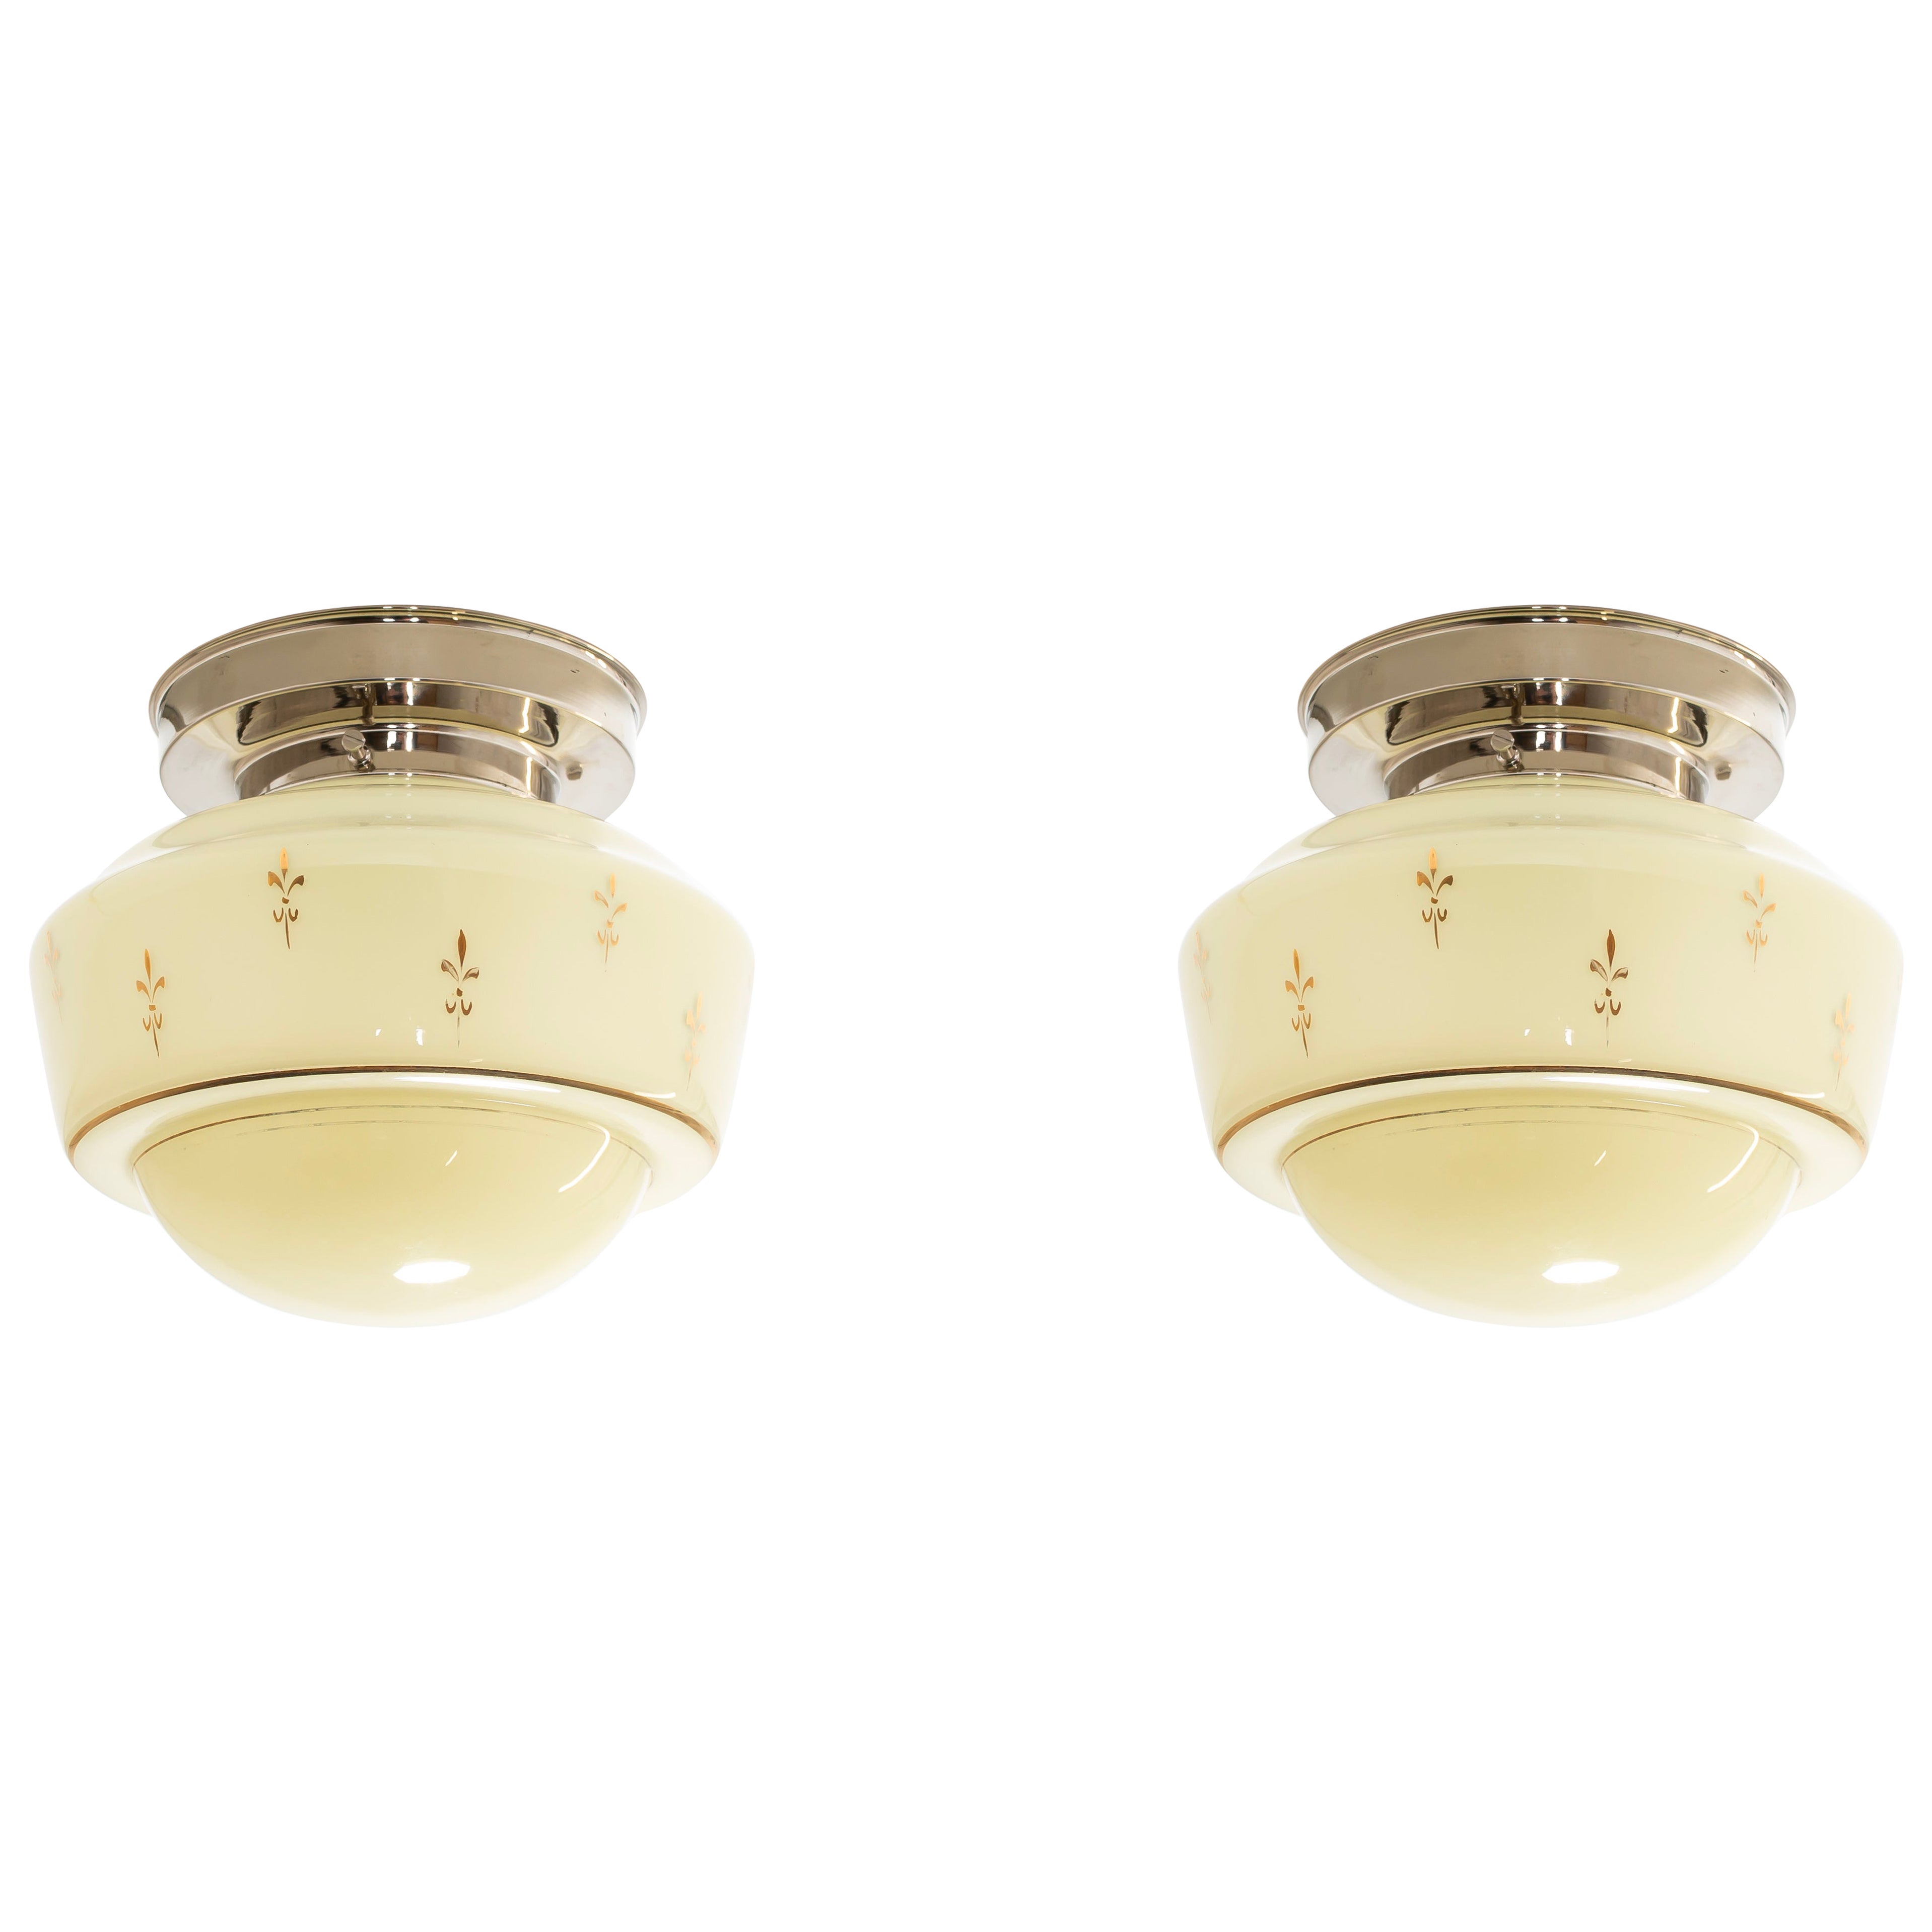 Functionalist Pair of Flush Mount Ceiling Lights, 1950s For Sale